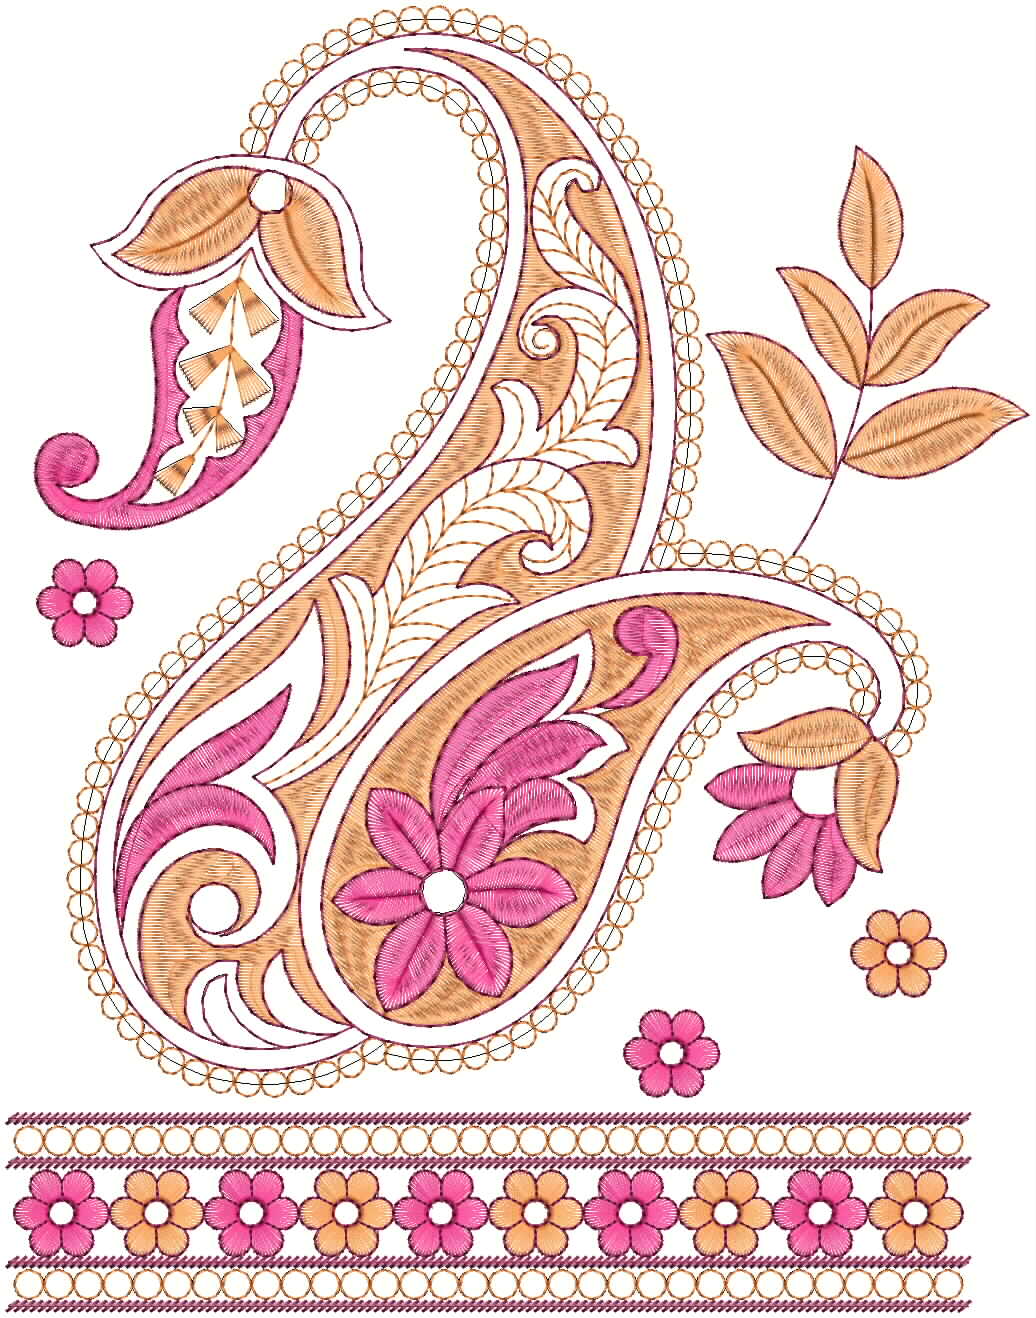 Embdesigntube: Violet | Beautiful Vintage Inspired Fashion Patches Designs